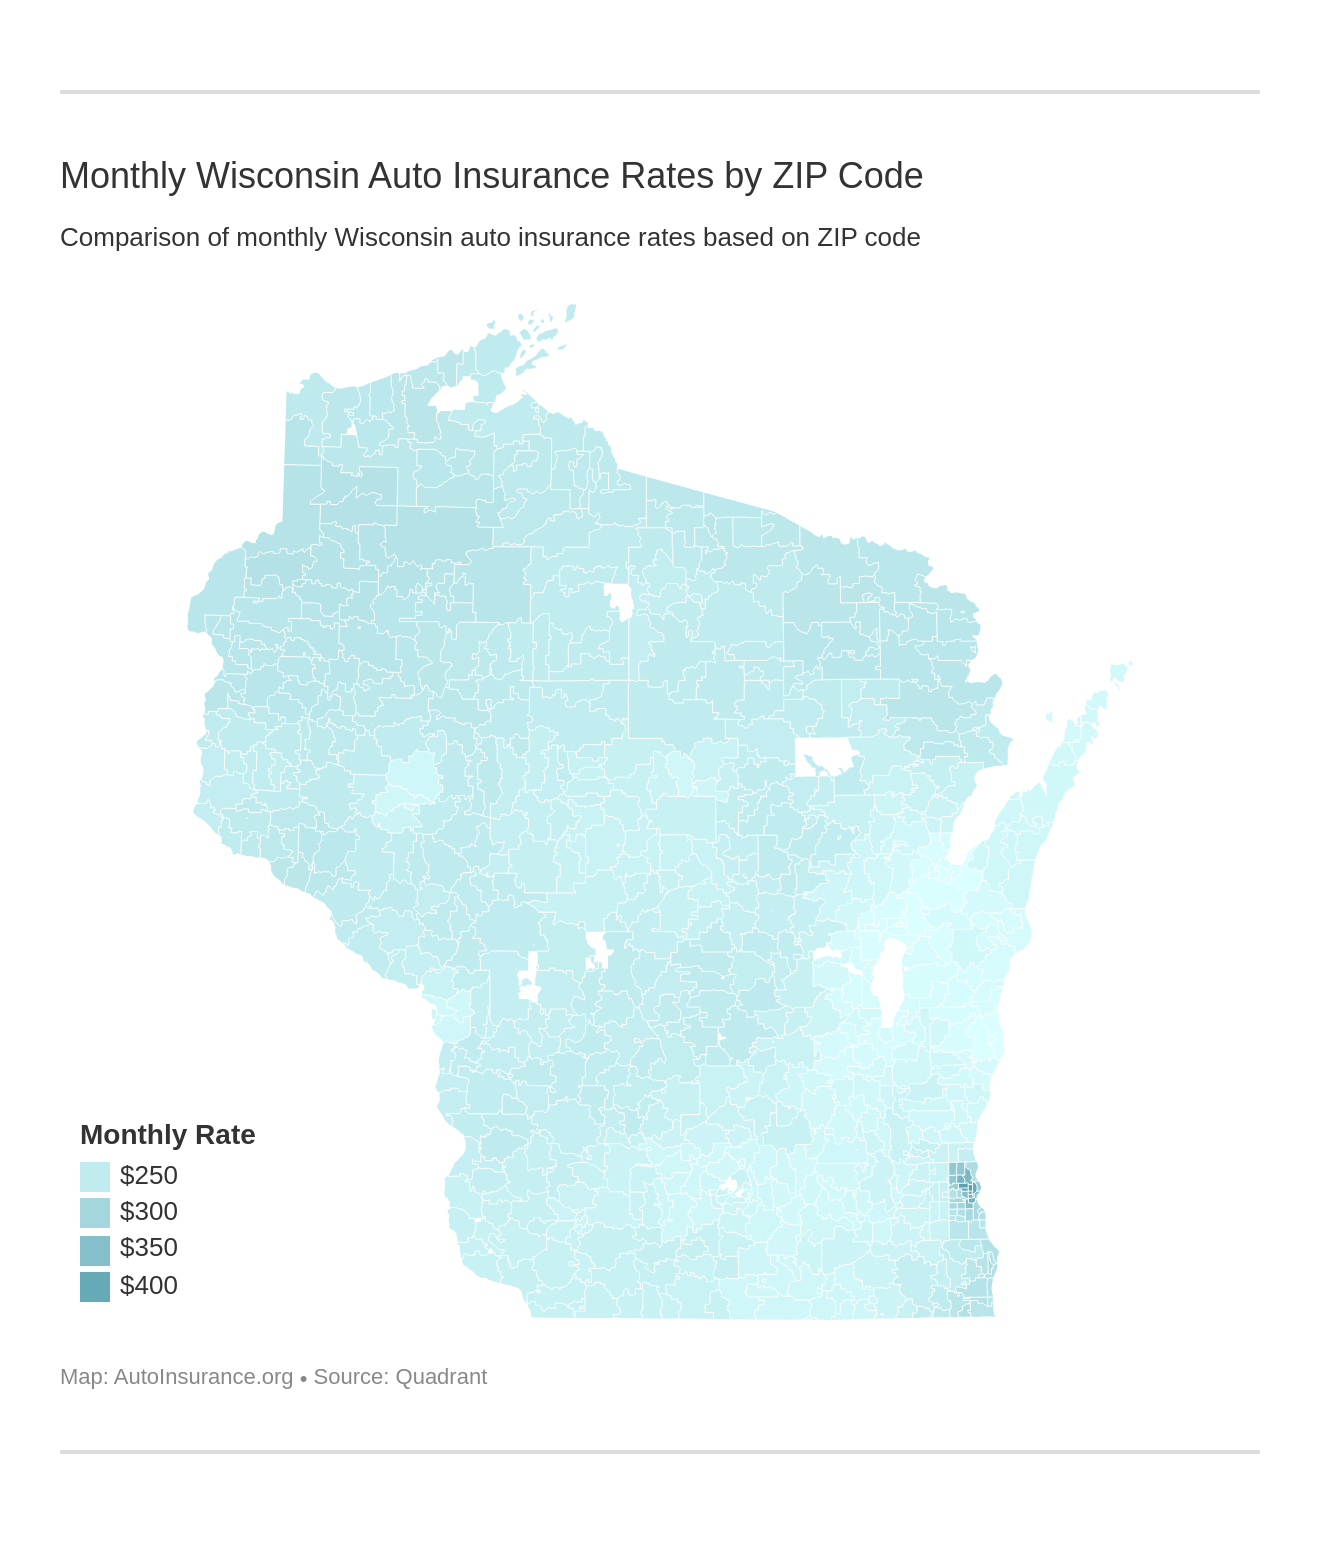 Monthly Wisconsin Auto Insurance Rates by ZIP Code